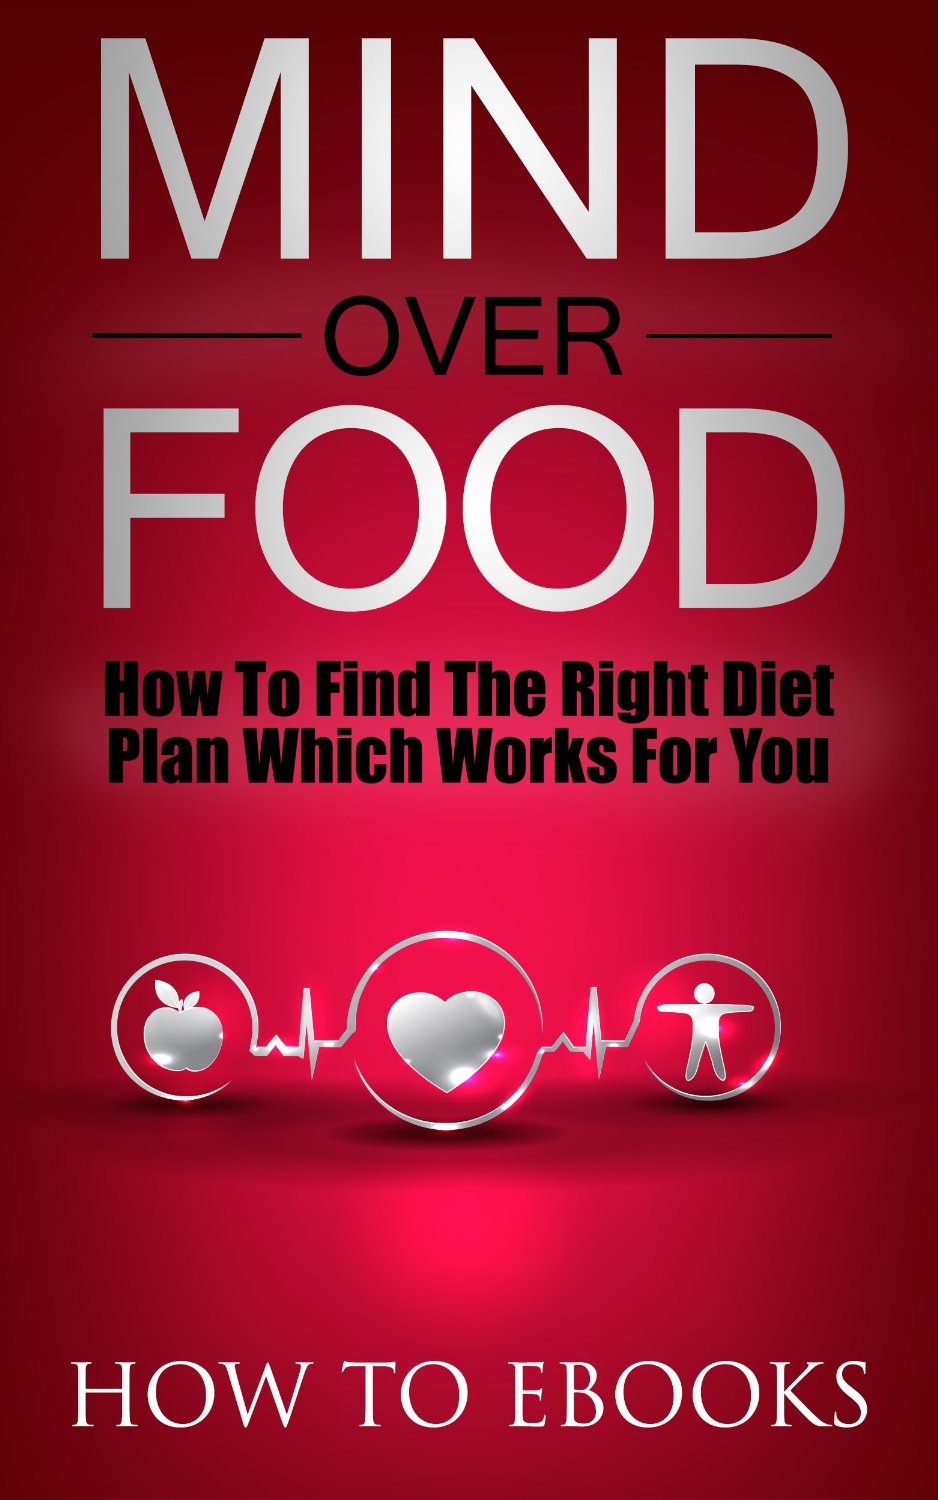 Mind Over Food – How To Find The Right Diet Plan Which Works For You by How To eBooks